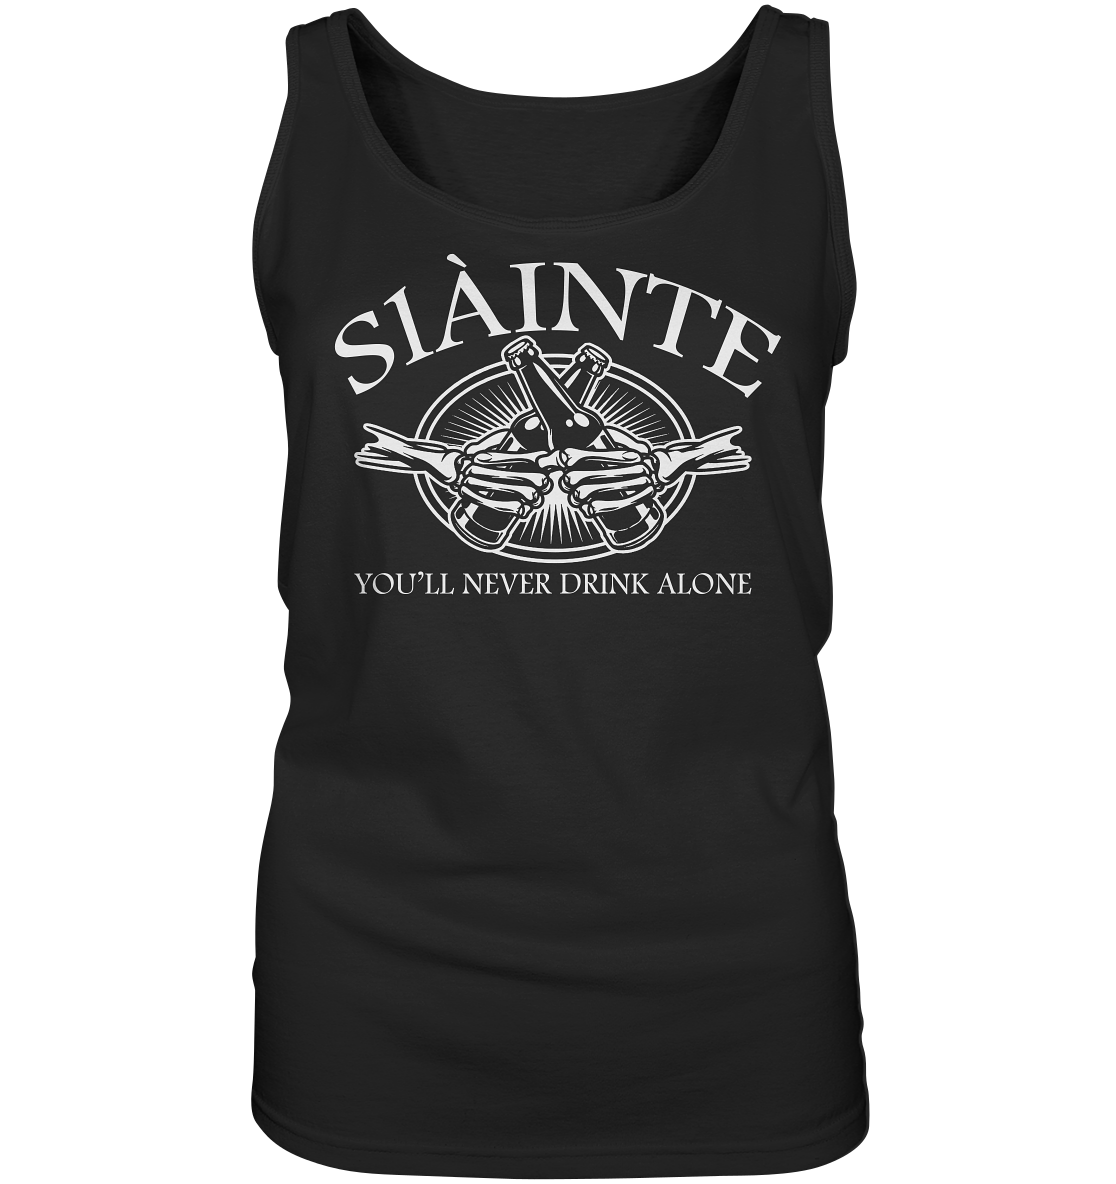 Sláinte "You'll Never Drink Alone" - Ladies Tank-Top